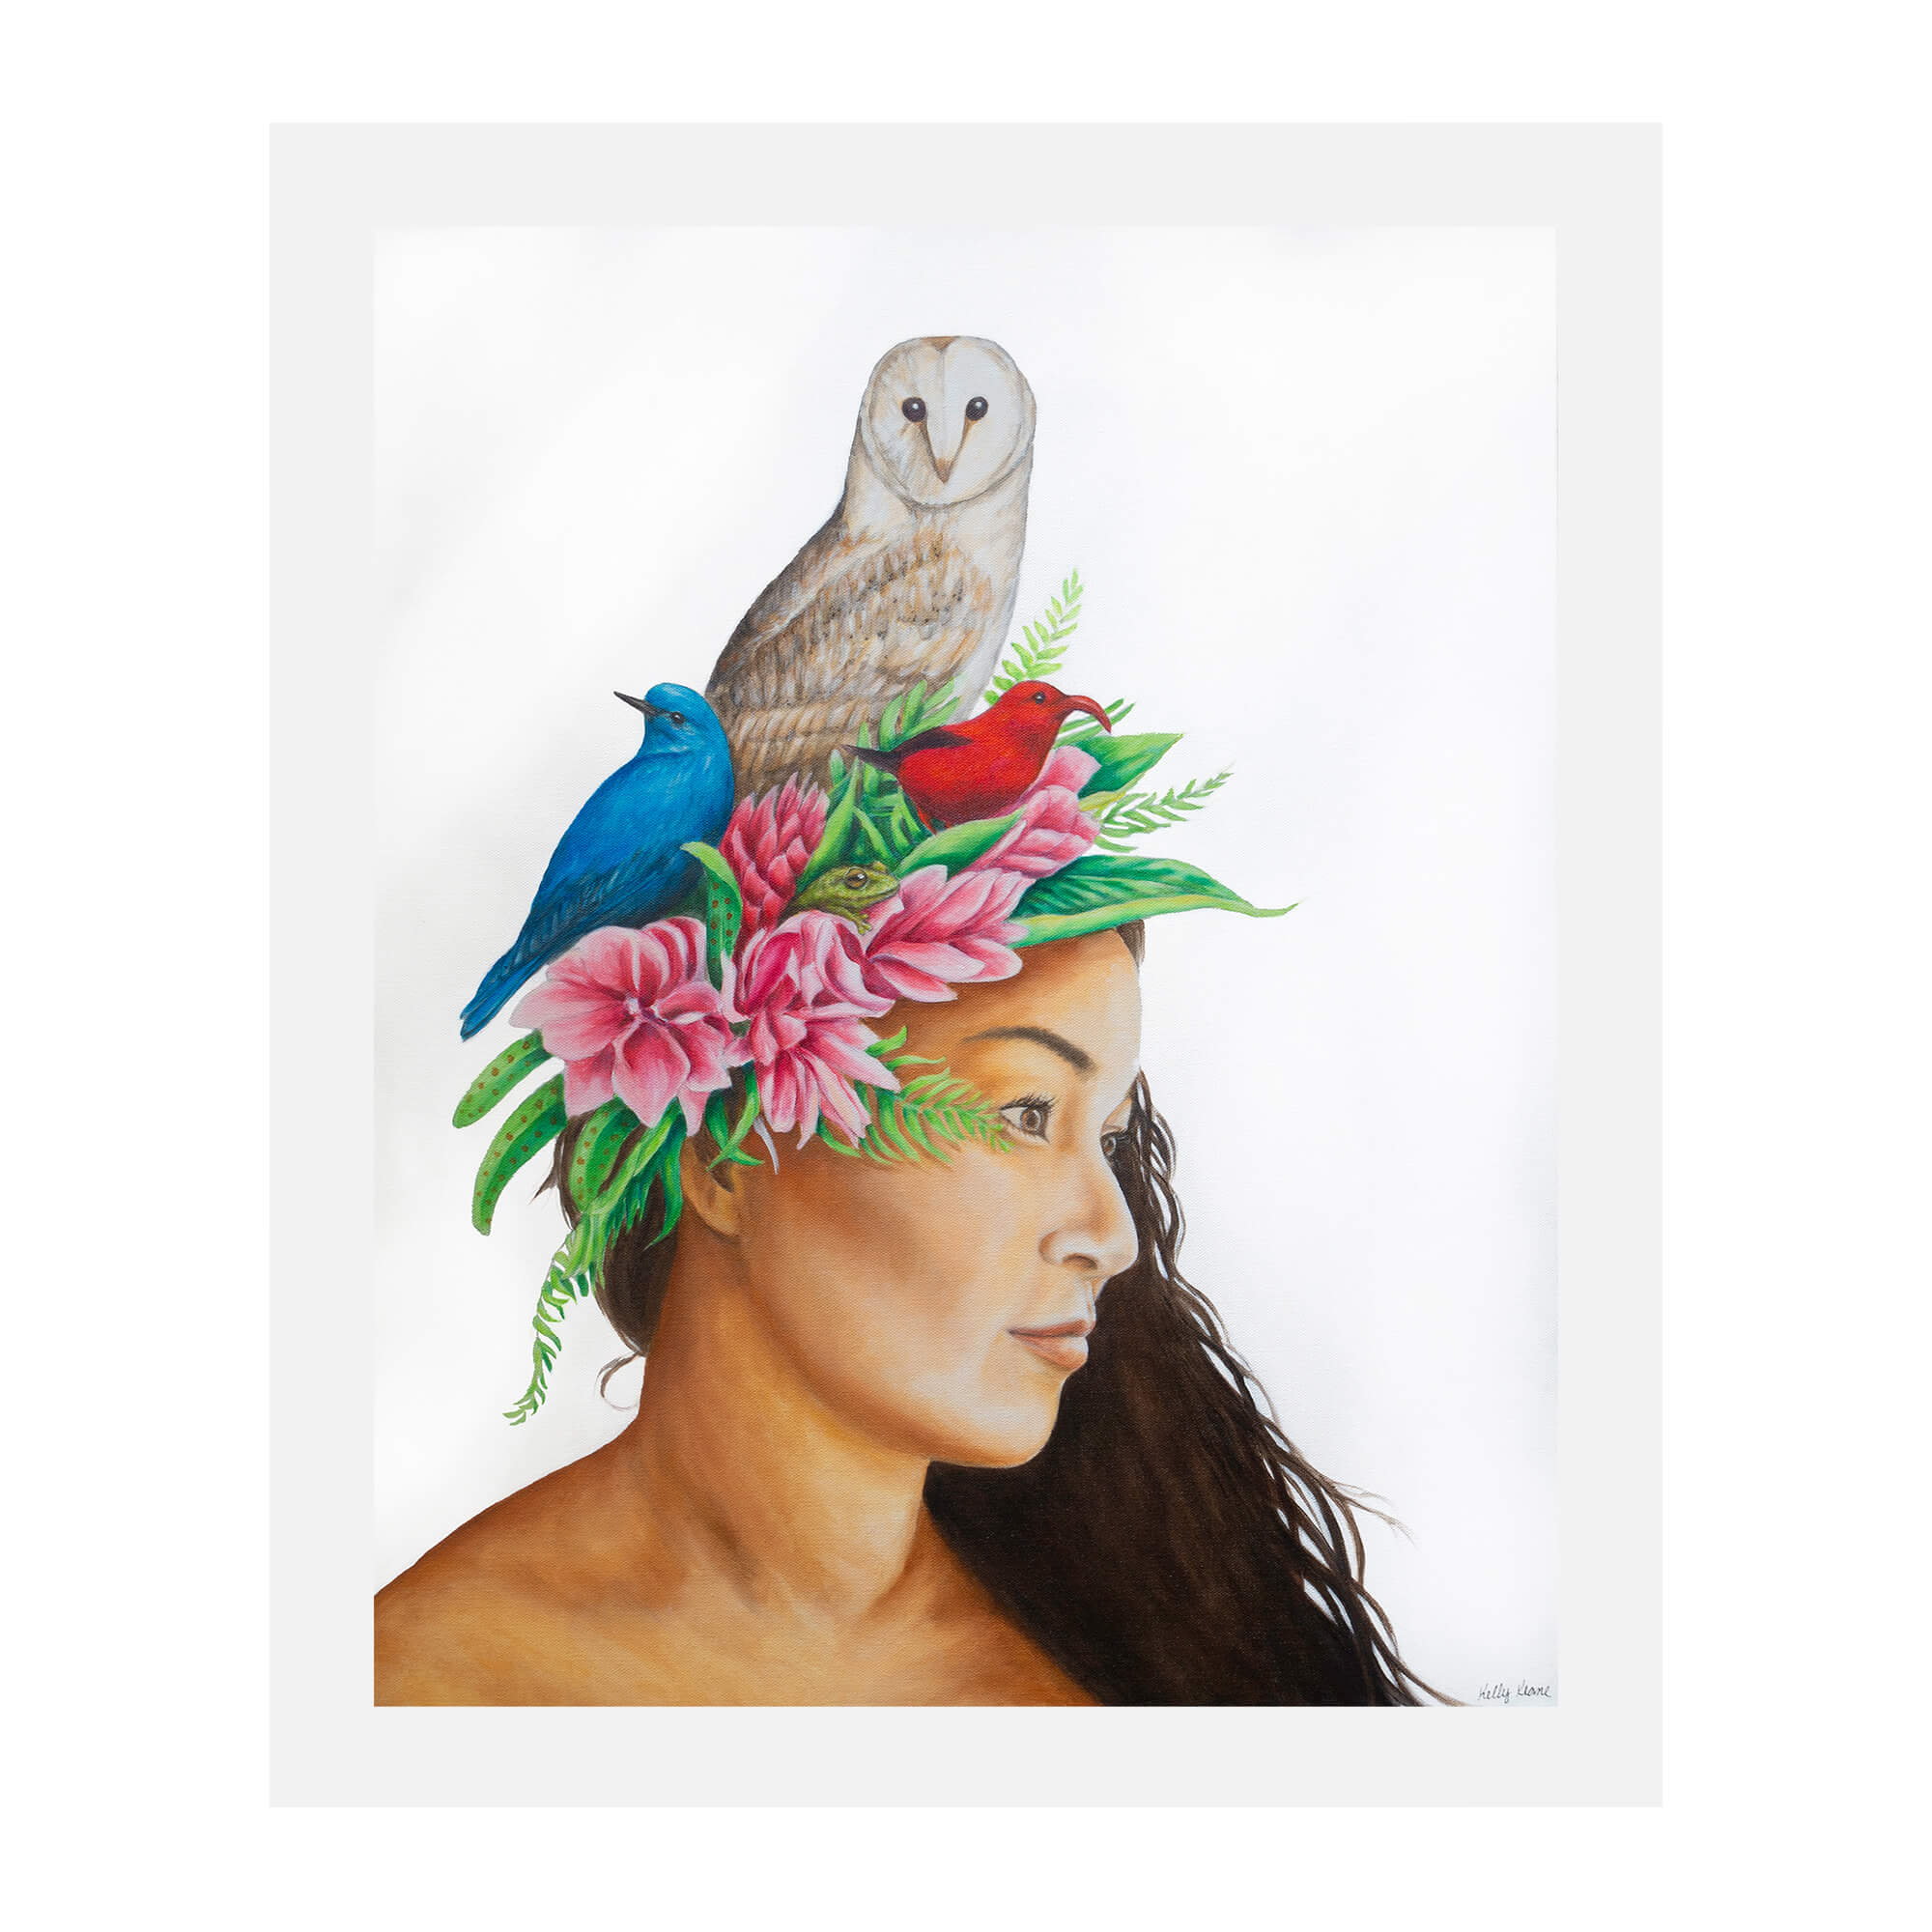 Paper art print of a woman wearing a pink colored lei with birds on it by hawaii artist Kelly Keane